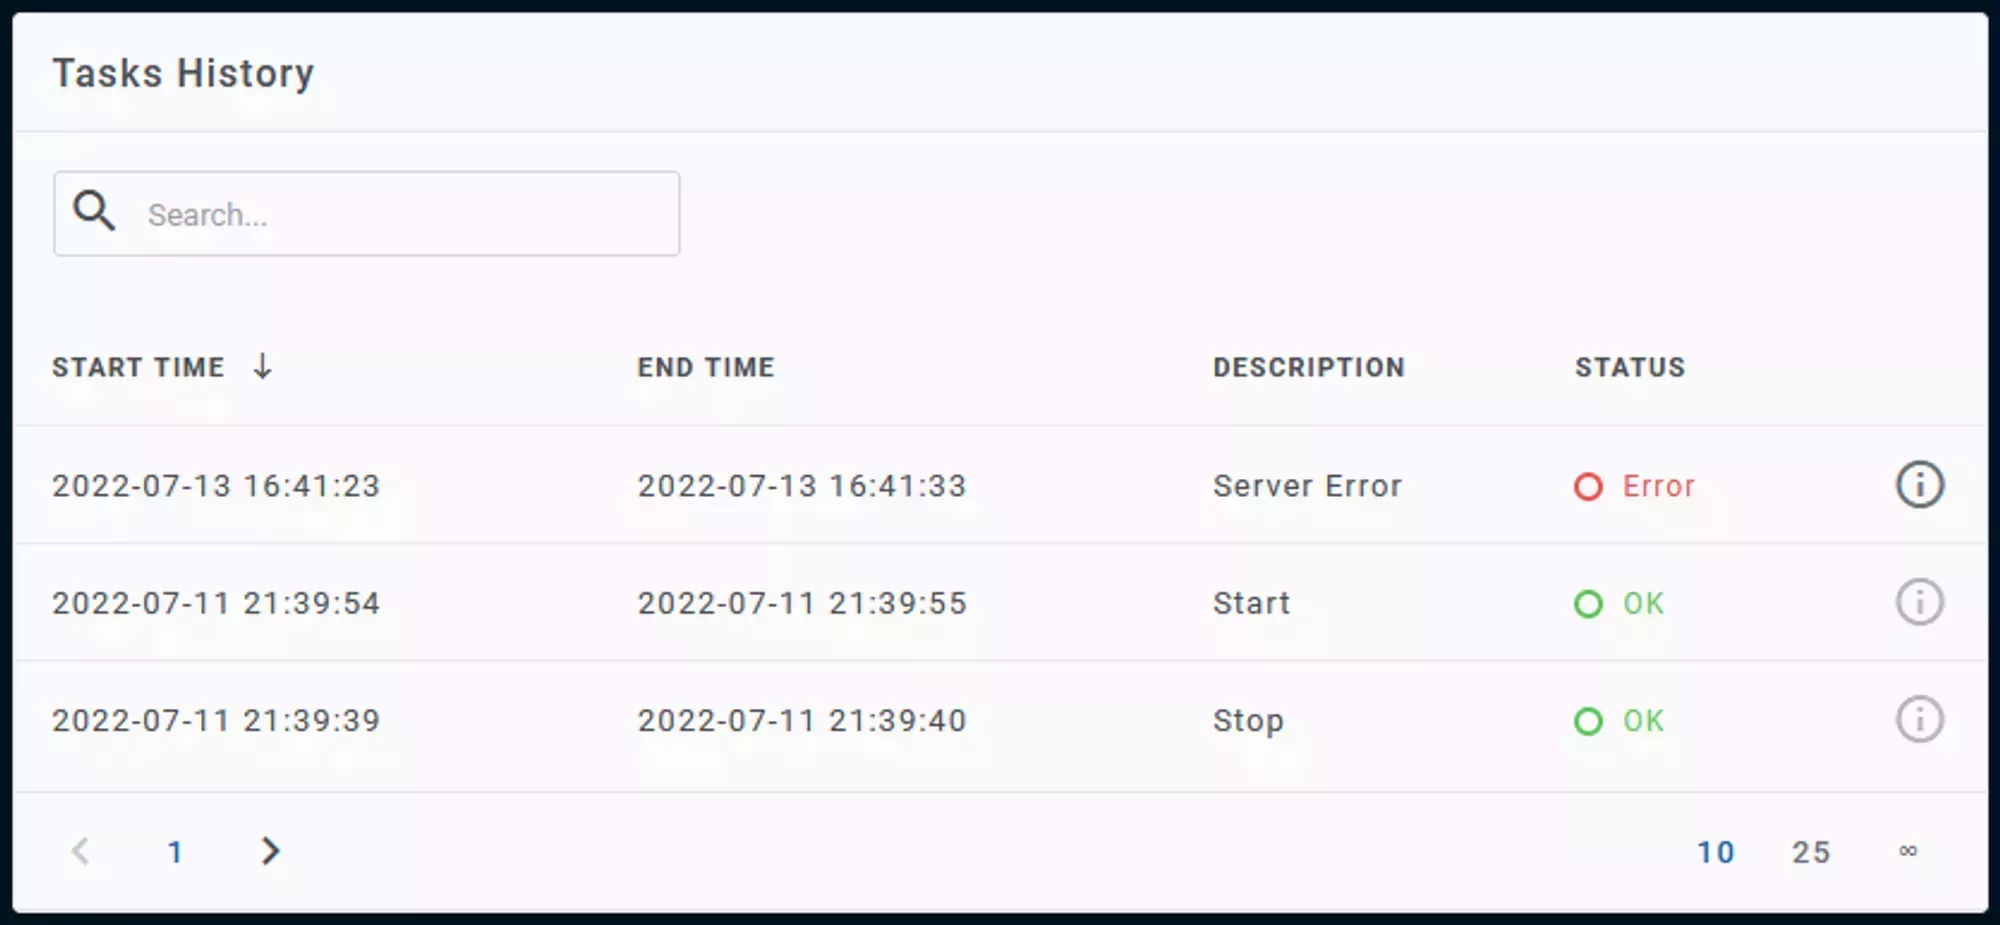 The VPS Task History Pane with two OK status logs and one Error log